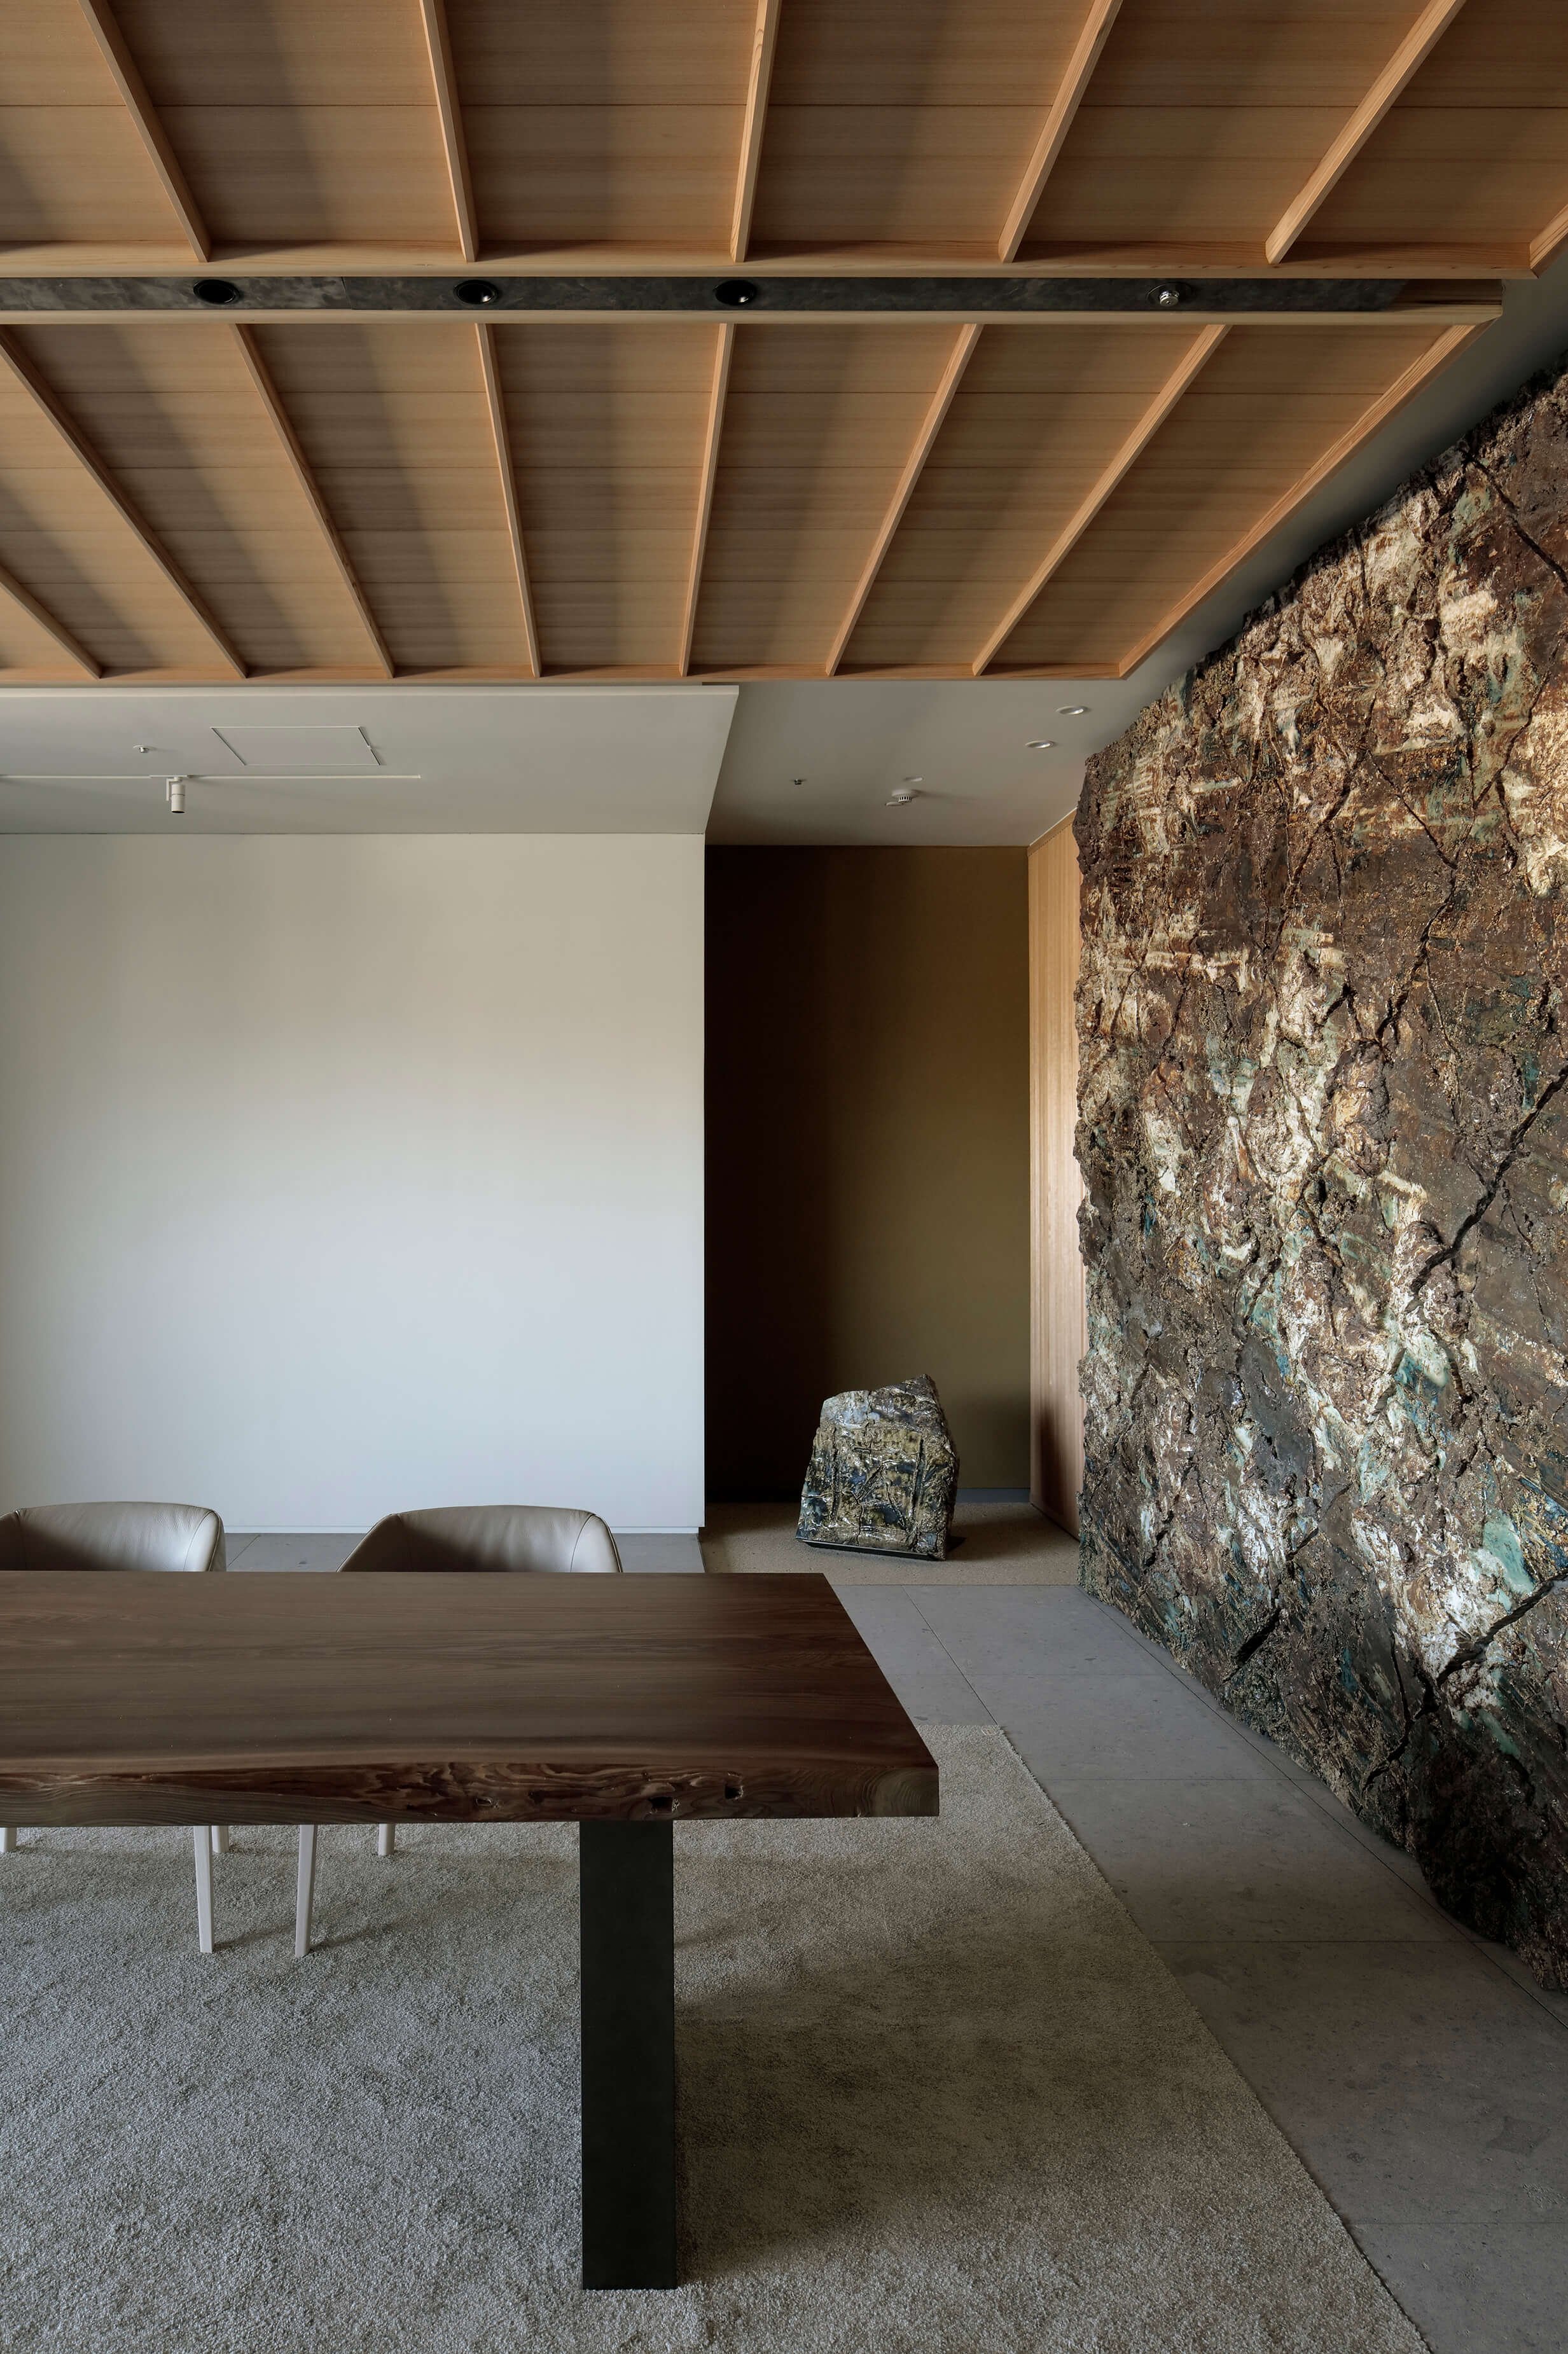 ceramic art wall and wooden table of ntv project by tomoyuki sakakida architect in tokyo japan